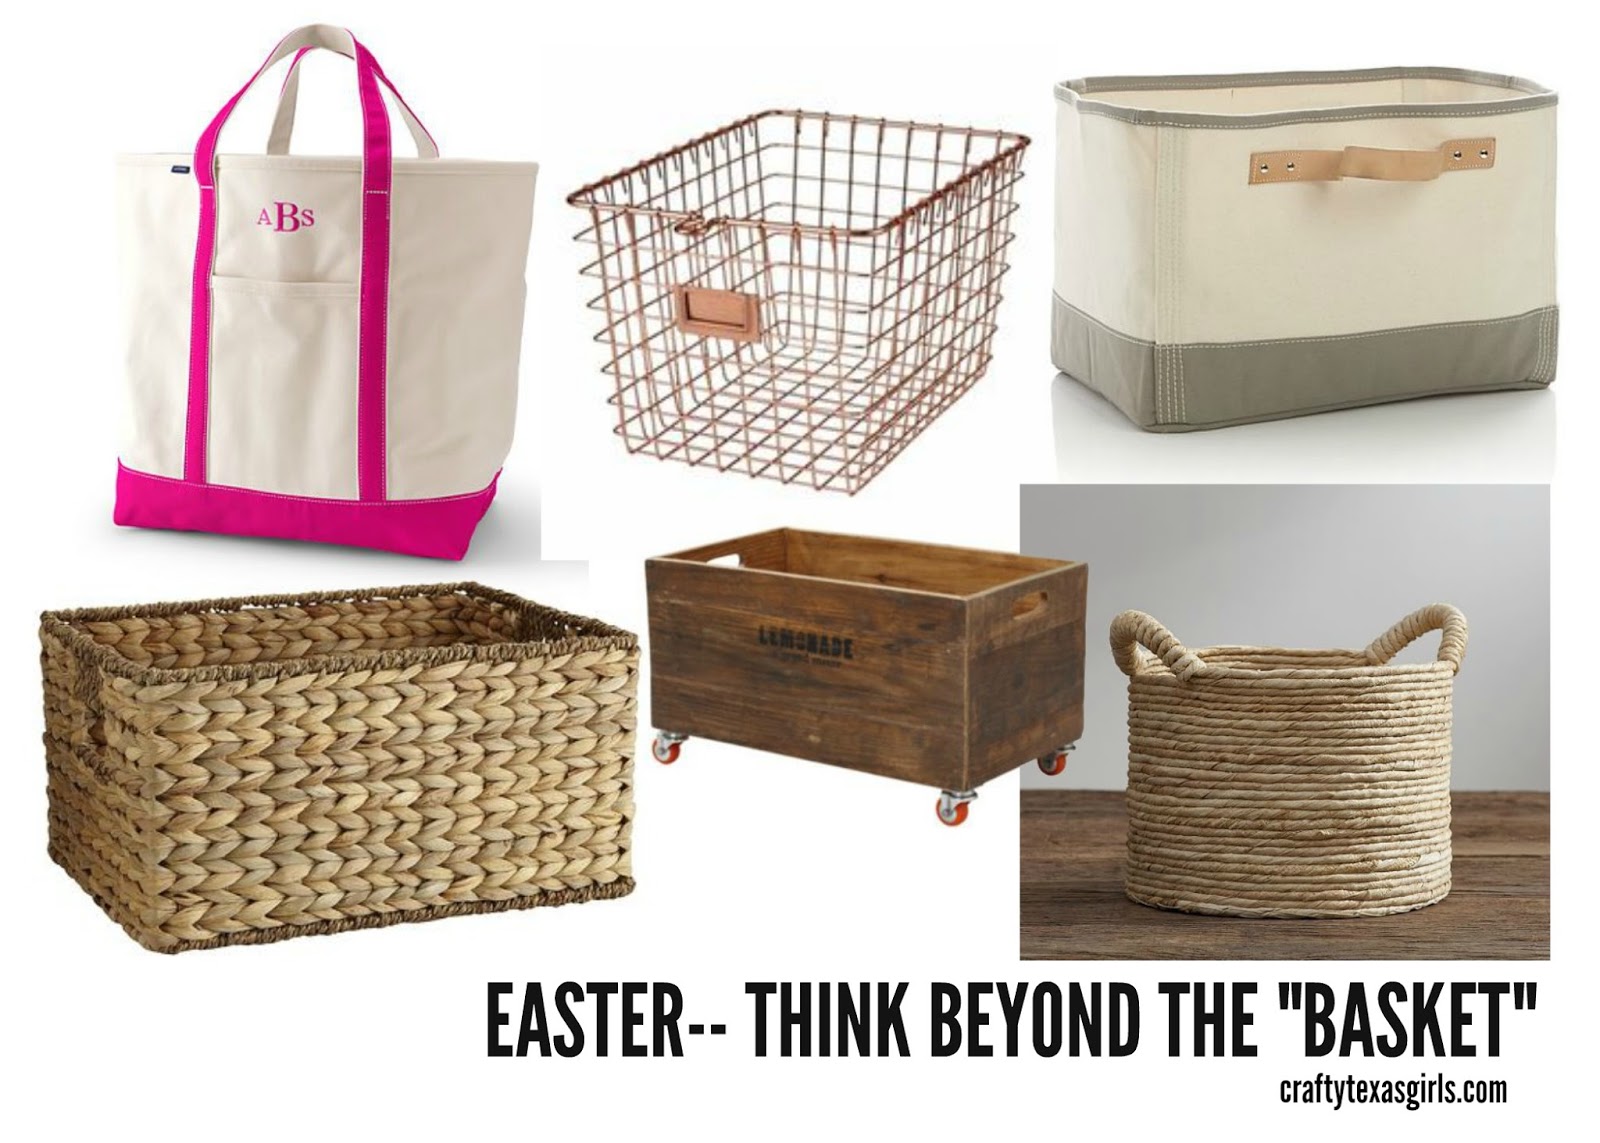 Crafty Texas Girls: Easter Basket Ideas for Girls & Boys (Reusable Items  they will Actually Use!)